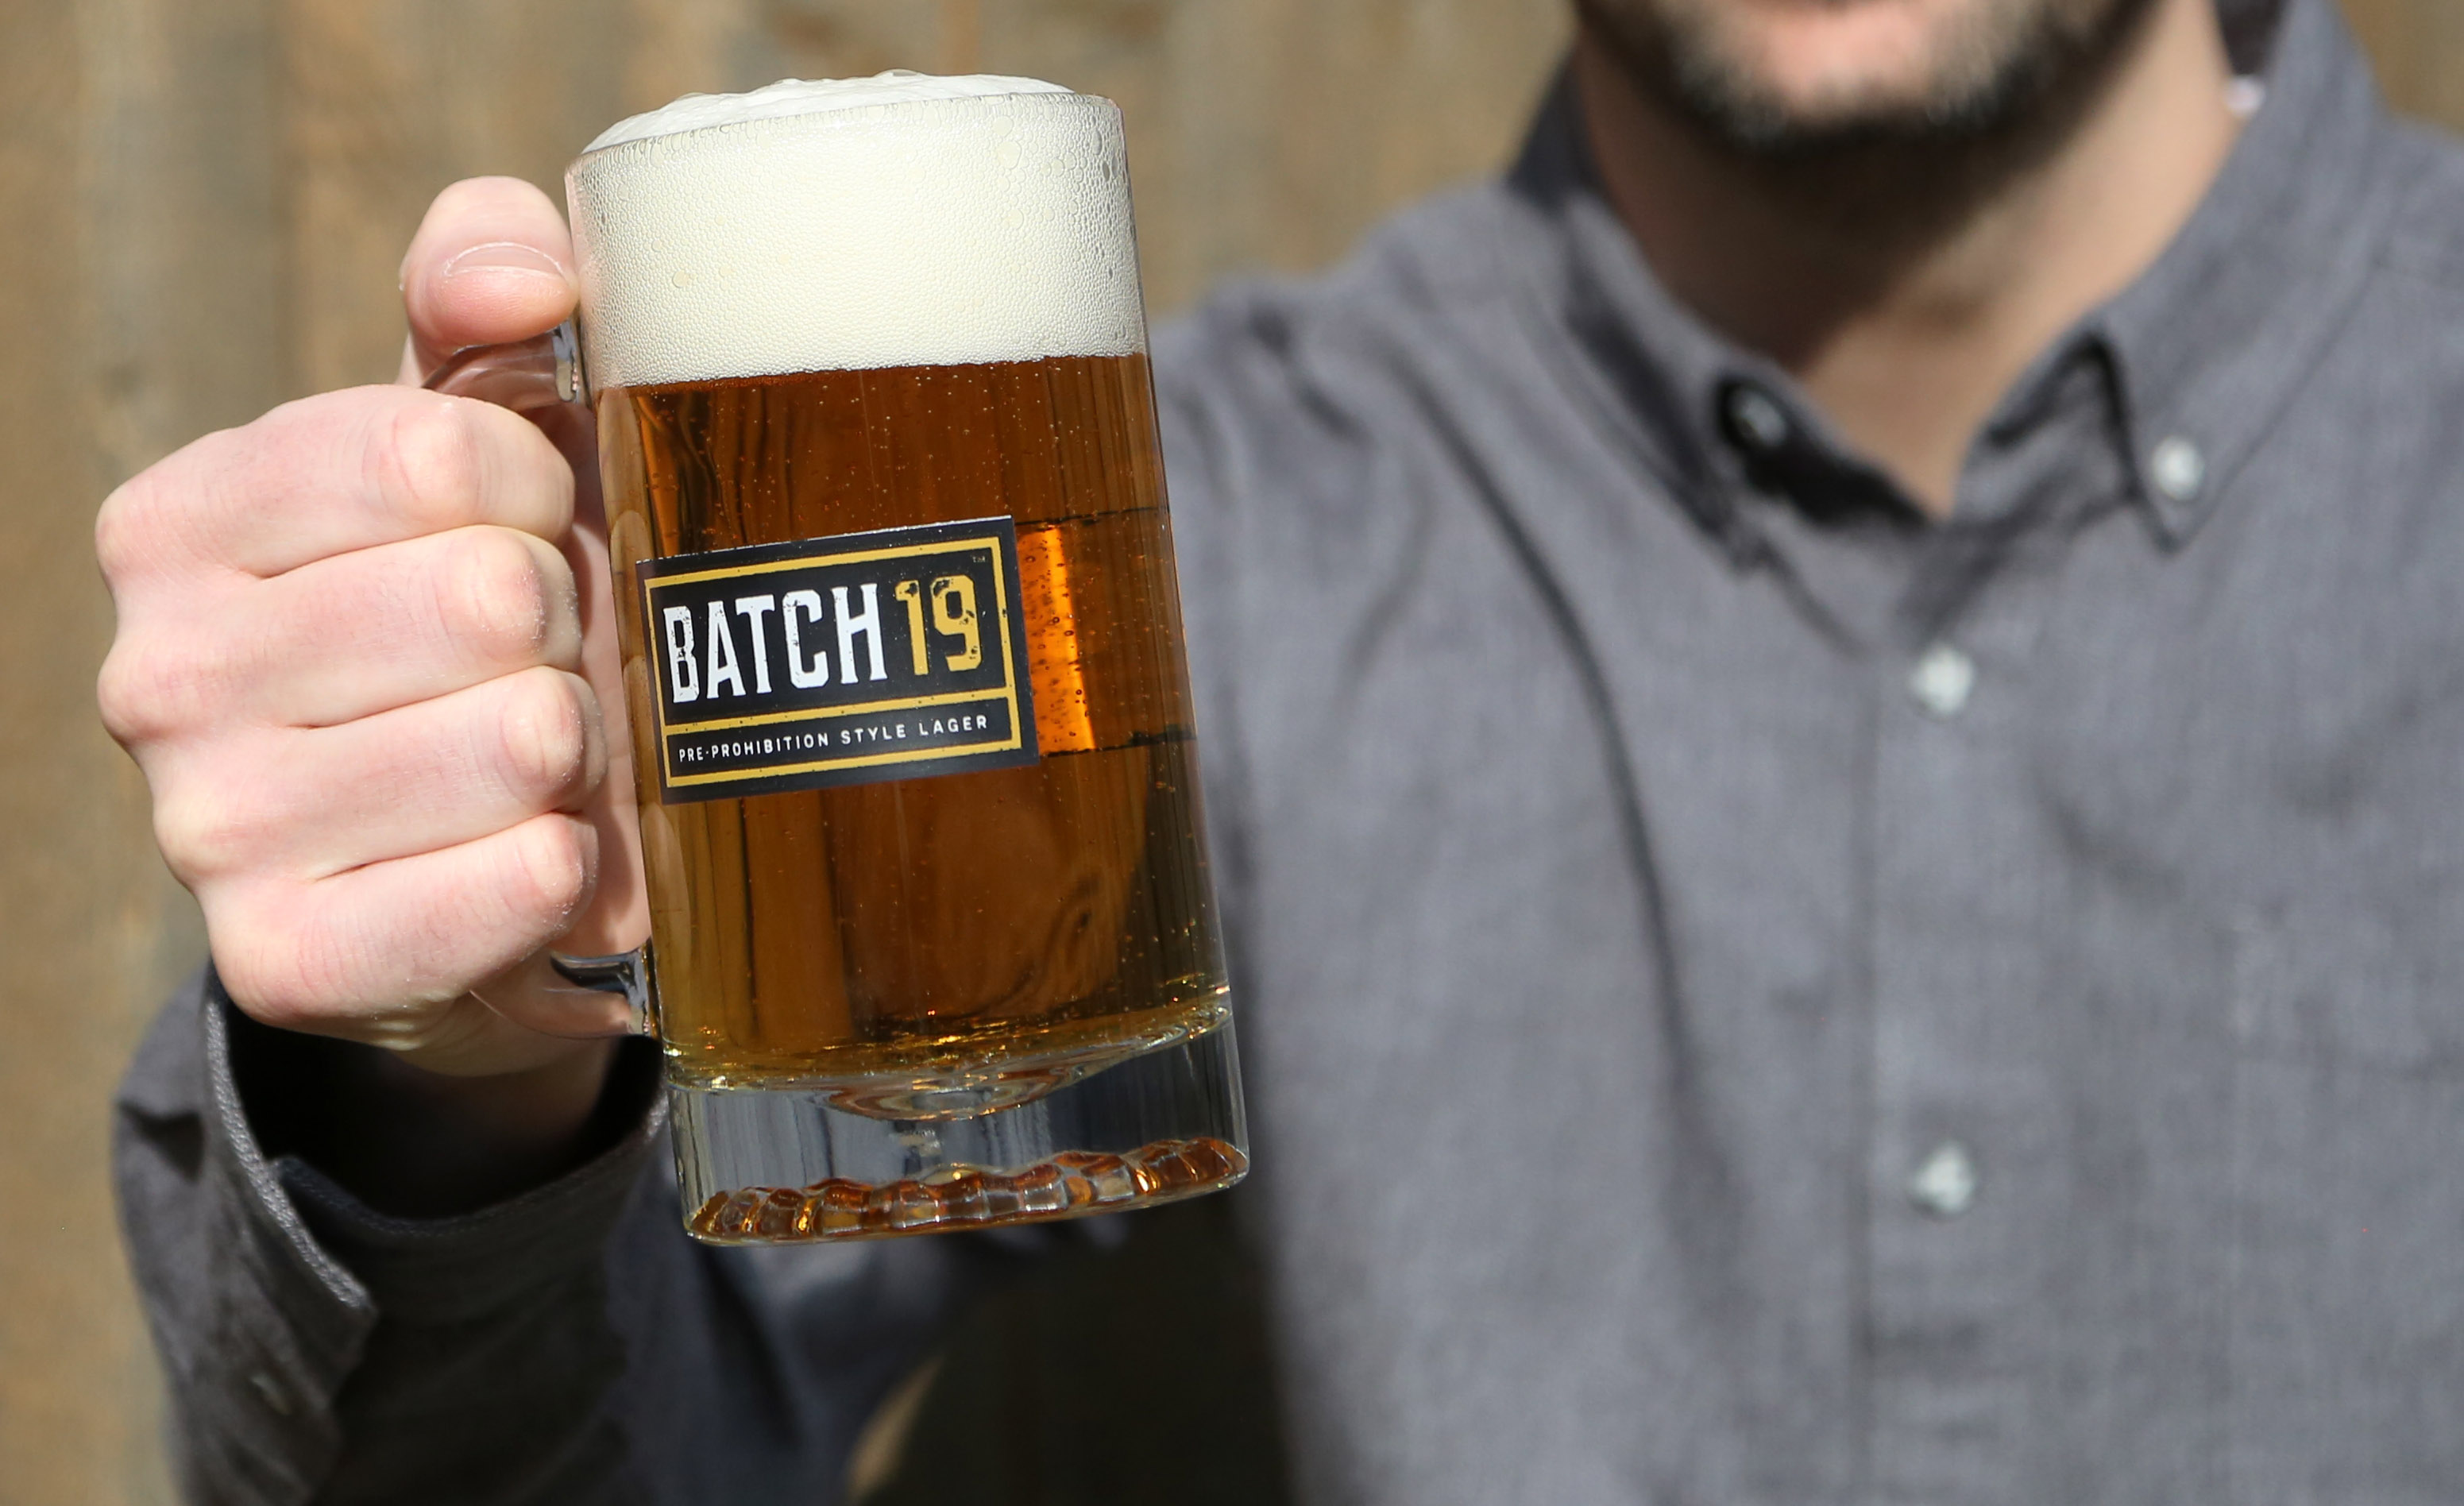 David Coors Talks Batch 19 Pre-Prohibition Lager & Future of AC Golden